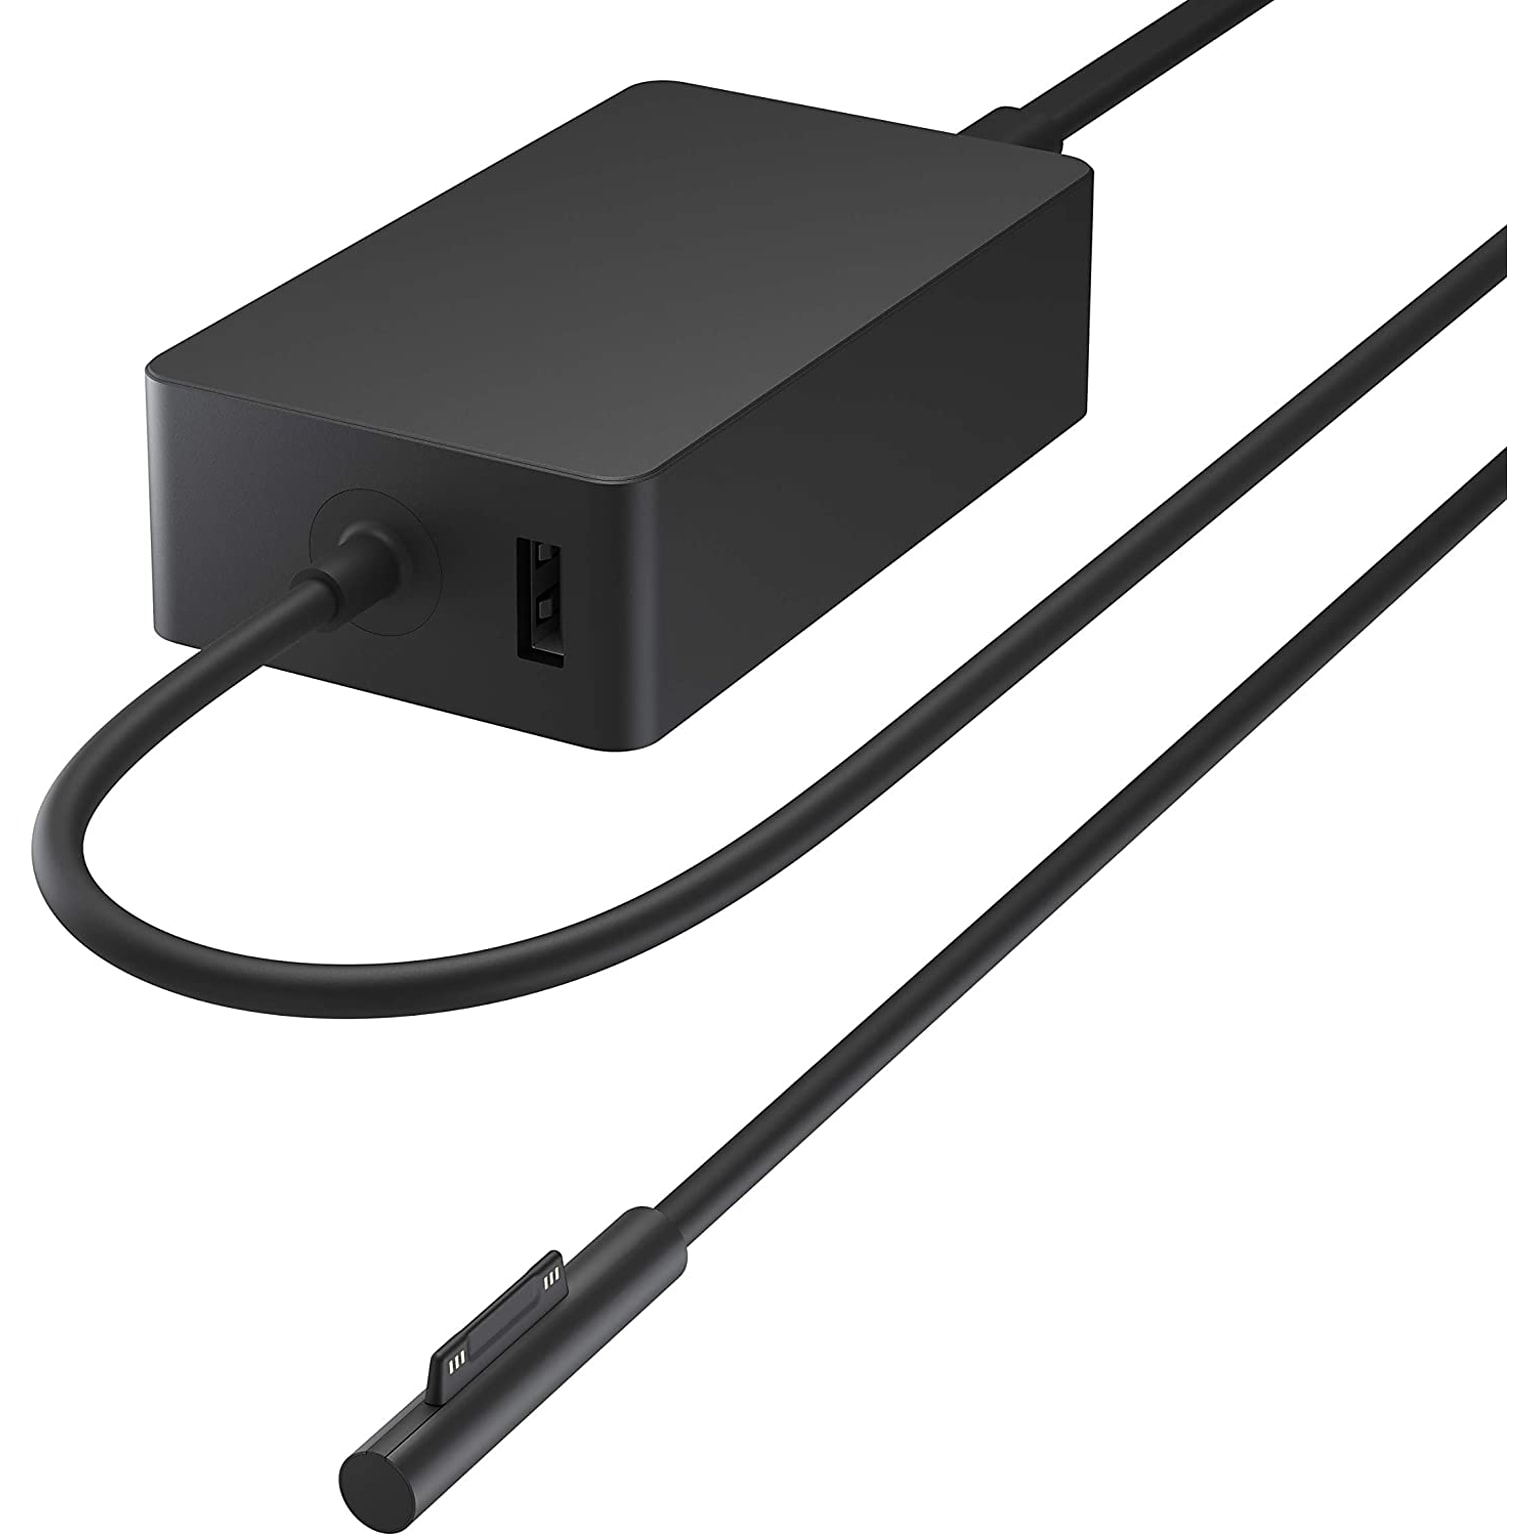 Microsoft Power Supply for Surface Books, 127W, Black (US7-00001)